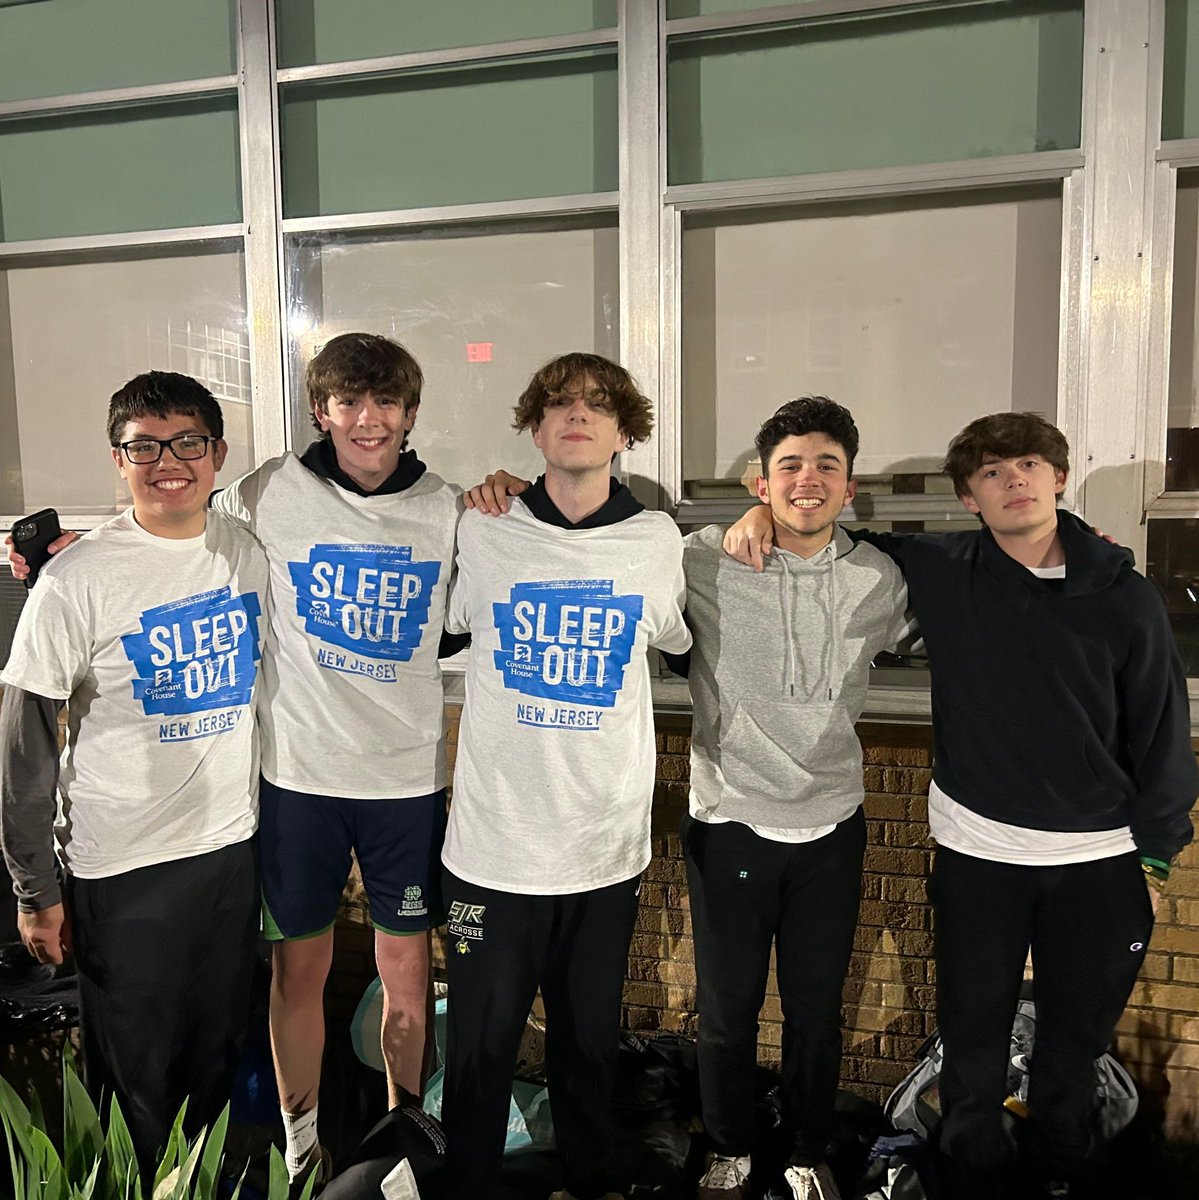 Last night over 100 SJR students came together for the Covenant House sleepout. Through their fundraising efforts the boys raised over $65,000 for Covenant House NJ, while also helping raise awareness for homeless teens. This is the Vir Fidelis! #VirFidelis #GreenKnights